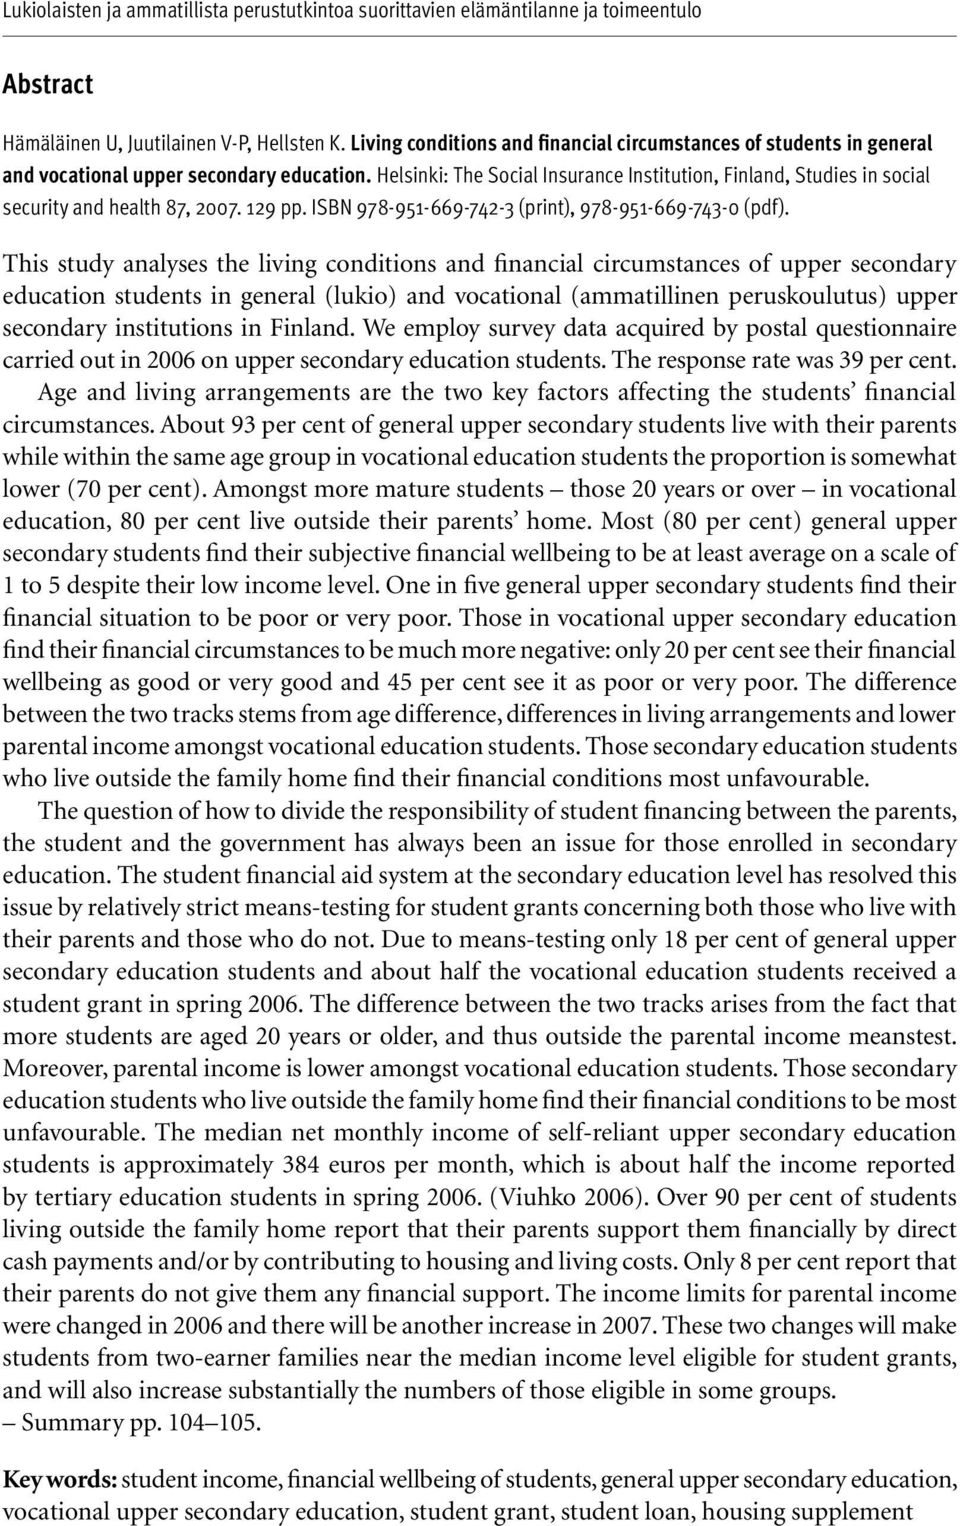 This study analyses the living conditions and financial circumstances of upper secondary education students in general (lukio) and vocational (ammatillinen peruskoulutus) upper secondary institutions